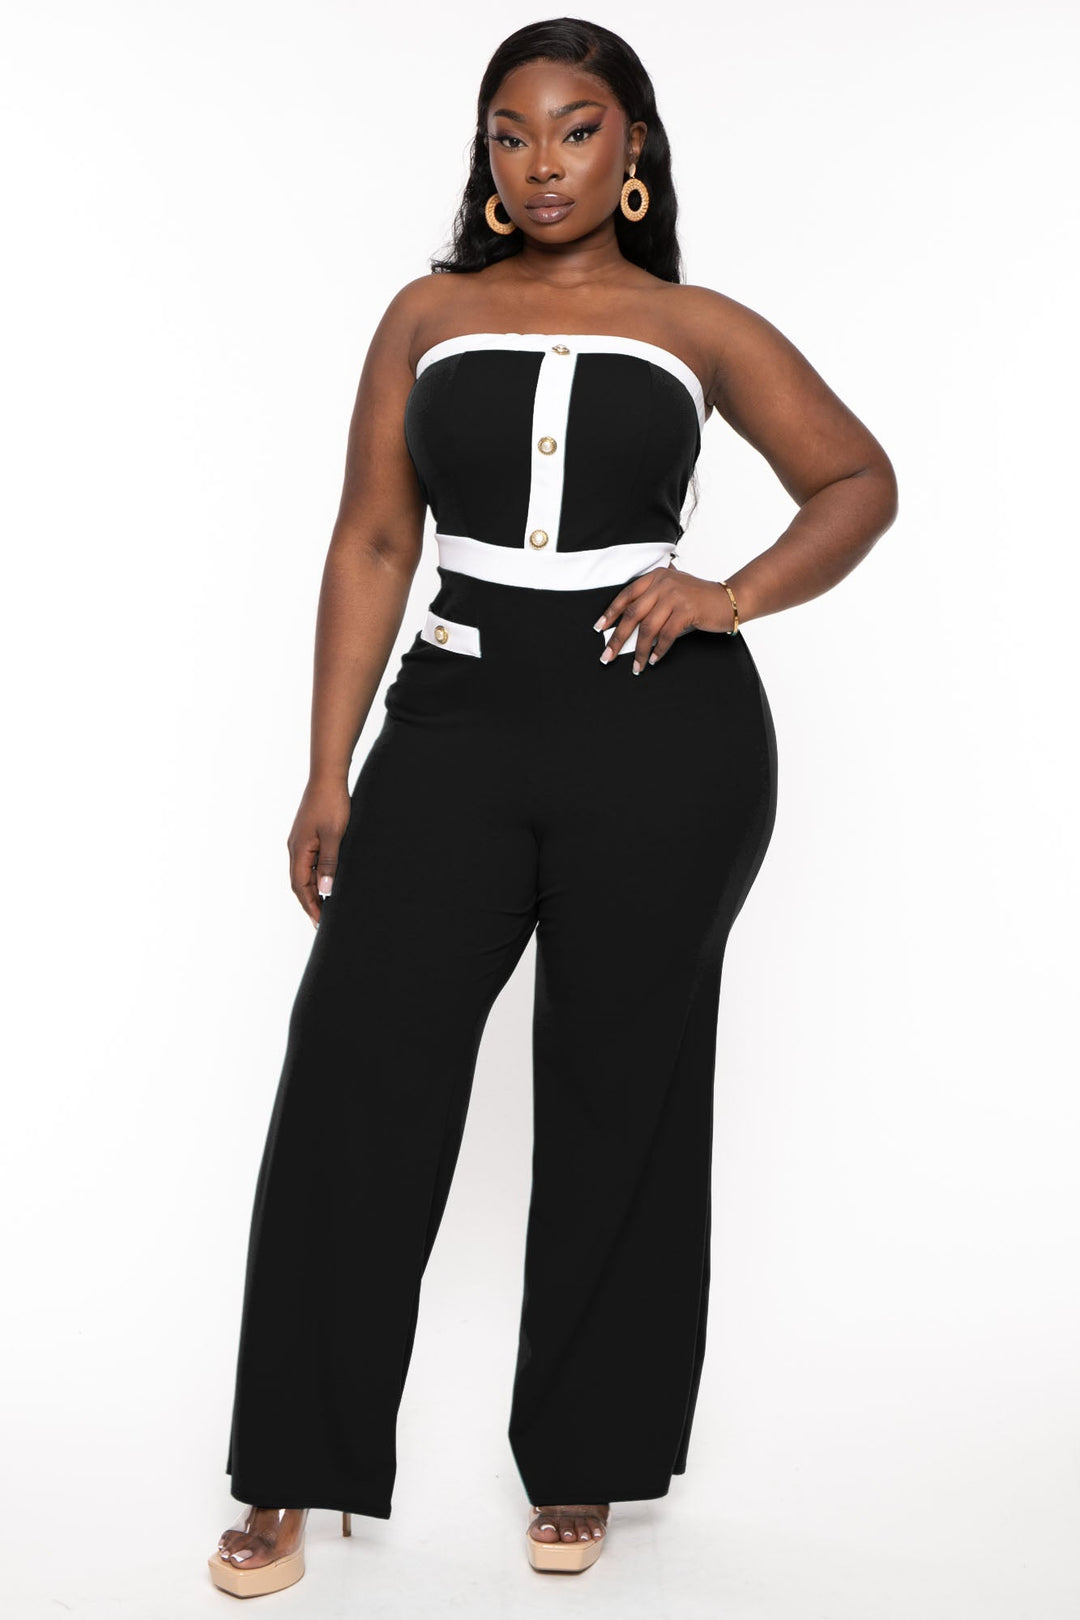 This plus size, stretch knit jumpsuit features an all over fishnet